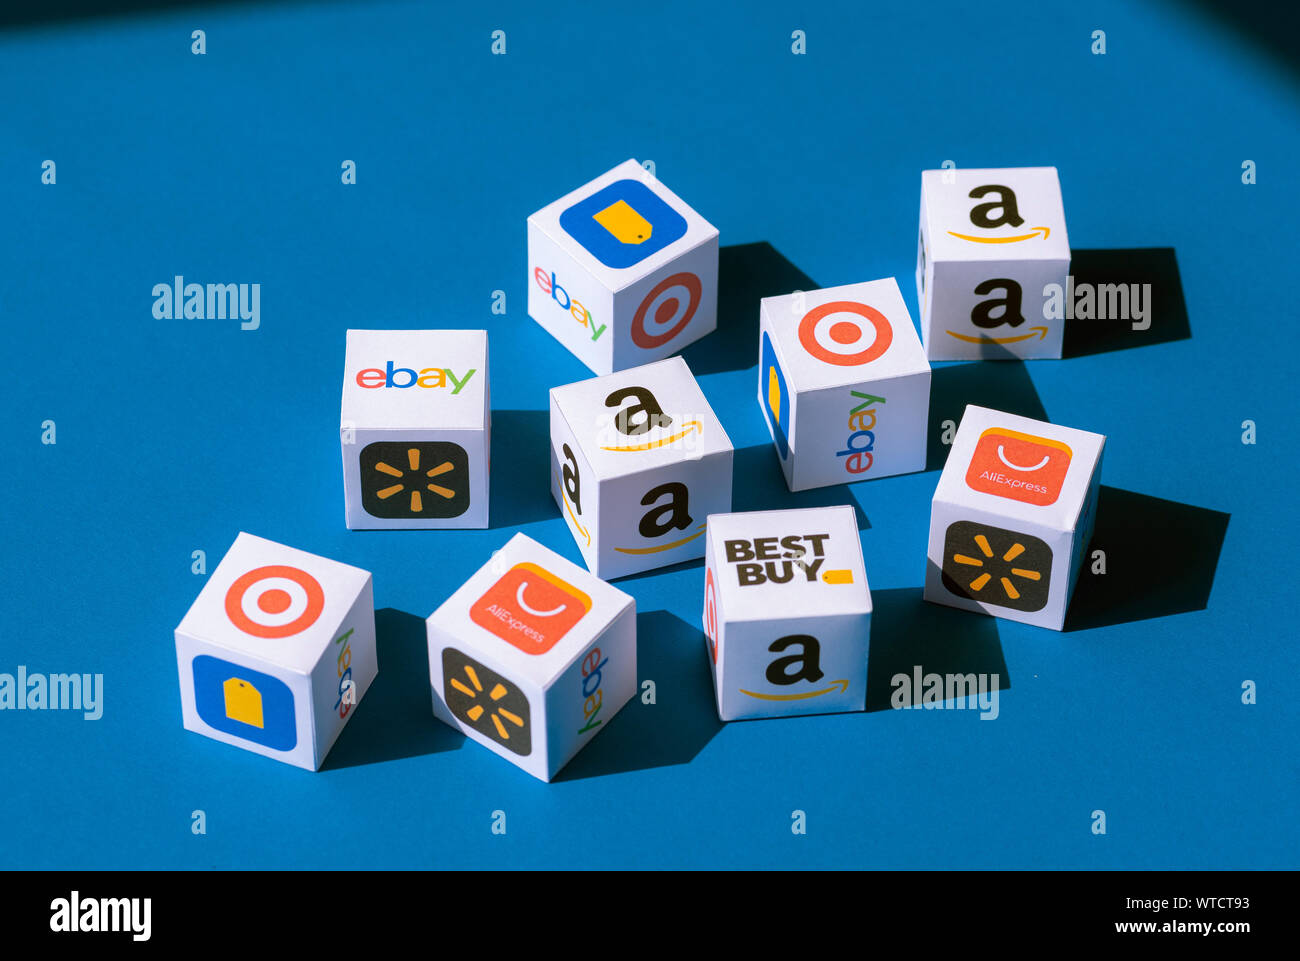 Kyiv, Ukraine - September 10, 2019: A paper cubes collection with printed logos of eCommerce corporations and online retail stores. Stock Photo